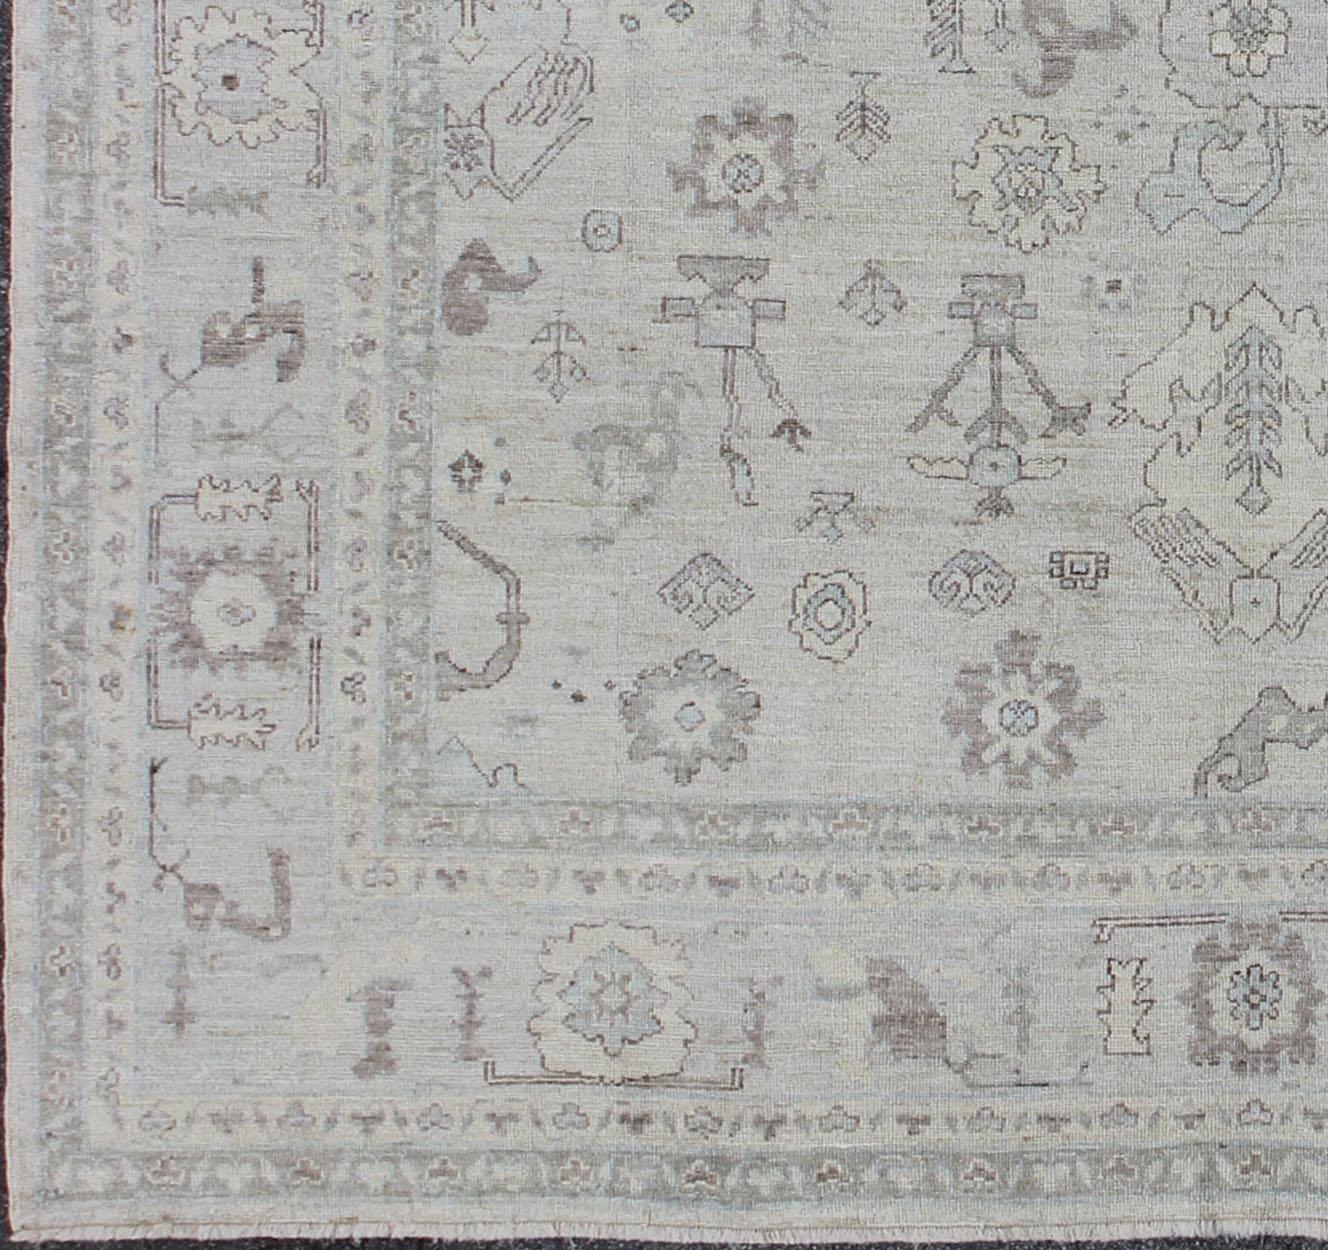 Square-sized silver, gray and ivory toned angora rug from Turkey, Keivan Woven Arts/rug AN-123612, country of origin / type: Turkey / Angora Oushak.

Measures: 11'9 x 12'2.

From our Angora collection, this piece is made with a combination of angora